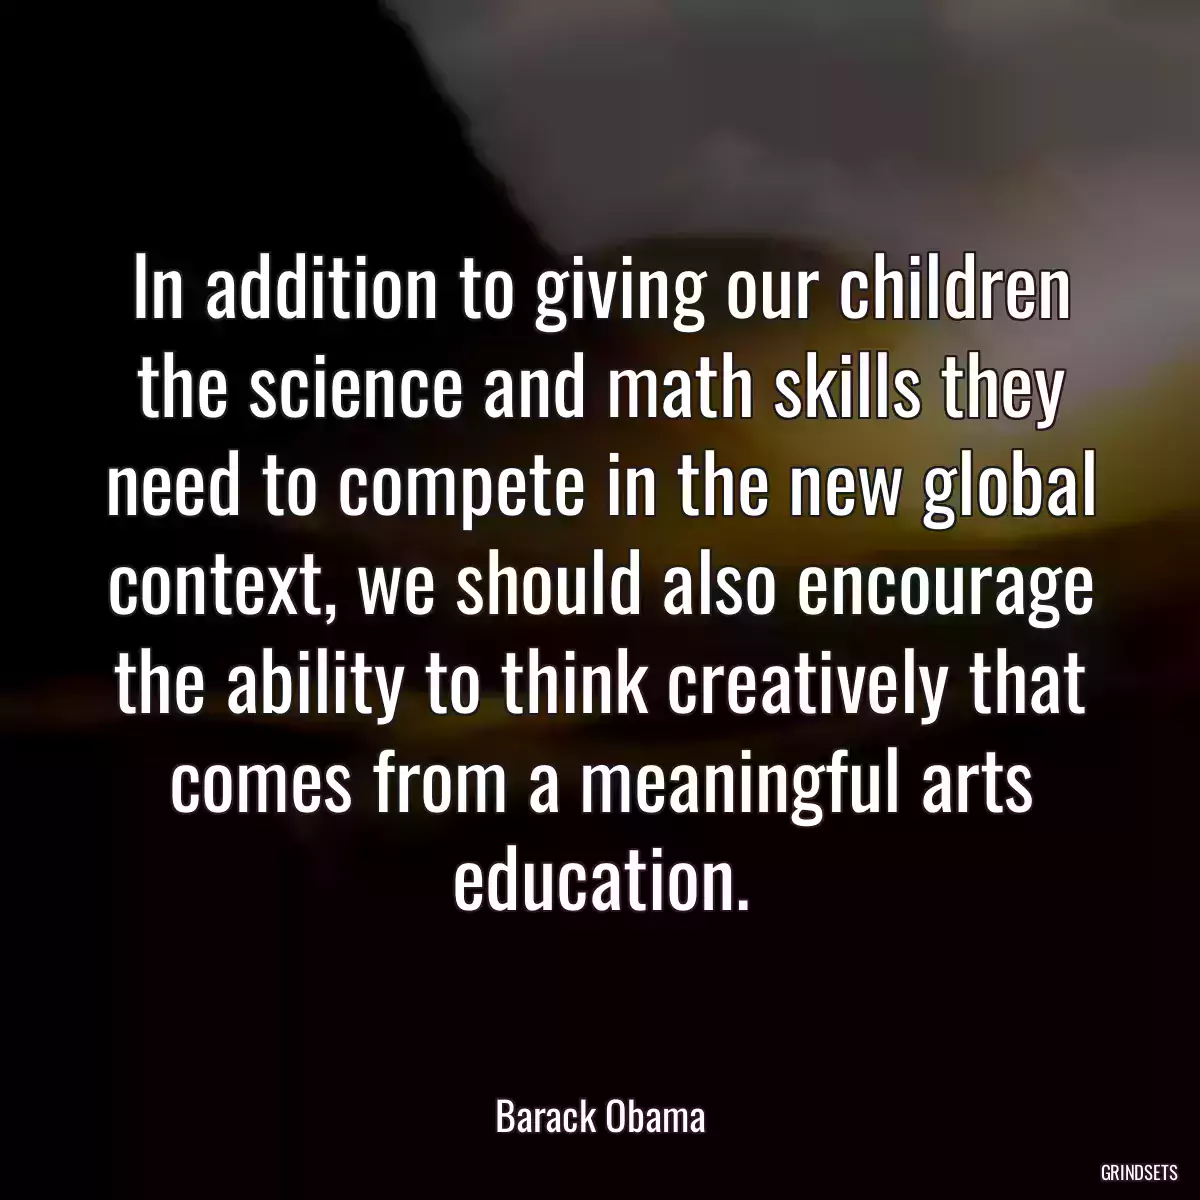 In addition to giving our children the science and math skills they need to compete in the new global context, we should also encourage the ability to think creatively that comes from a meaningful arts education.